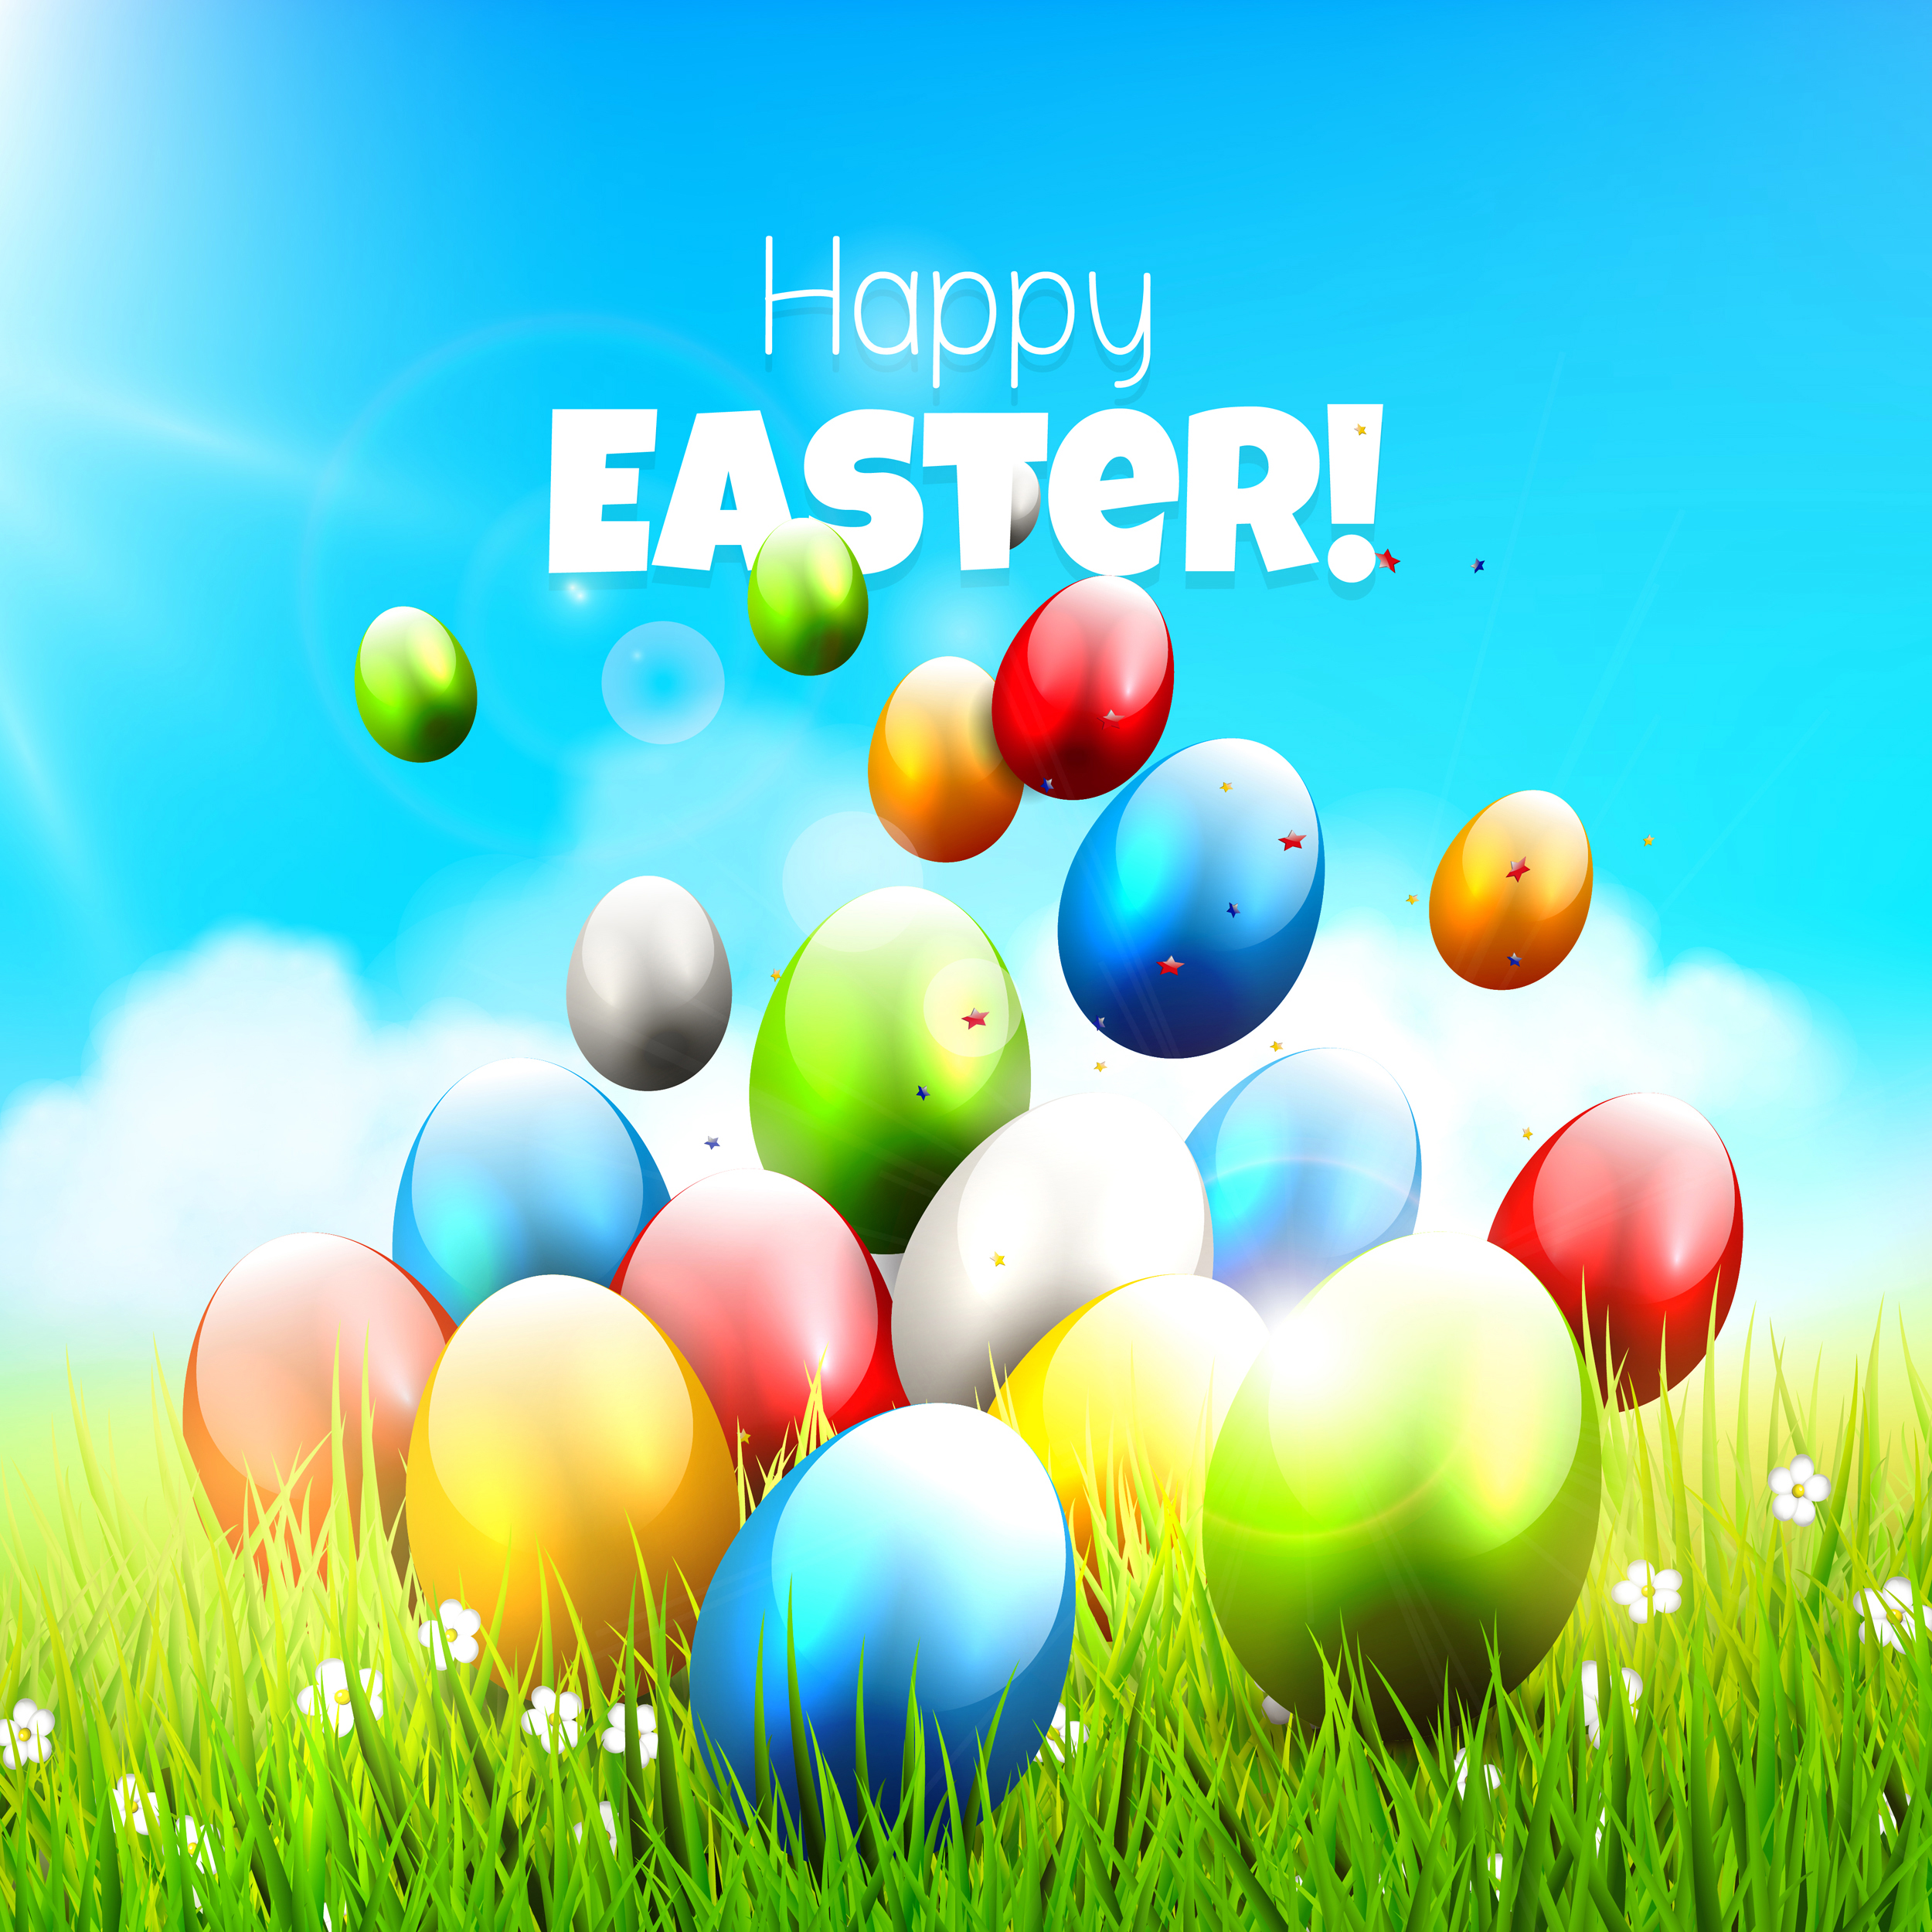 Happy Easter Grass Background with Eggs Gallery Yopriceville